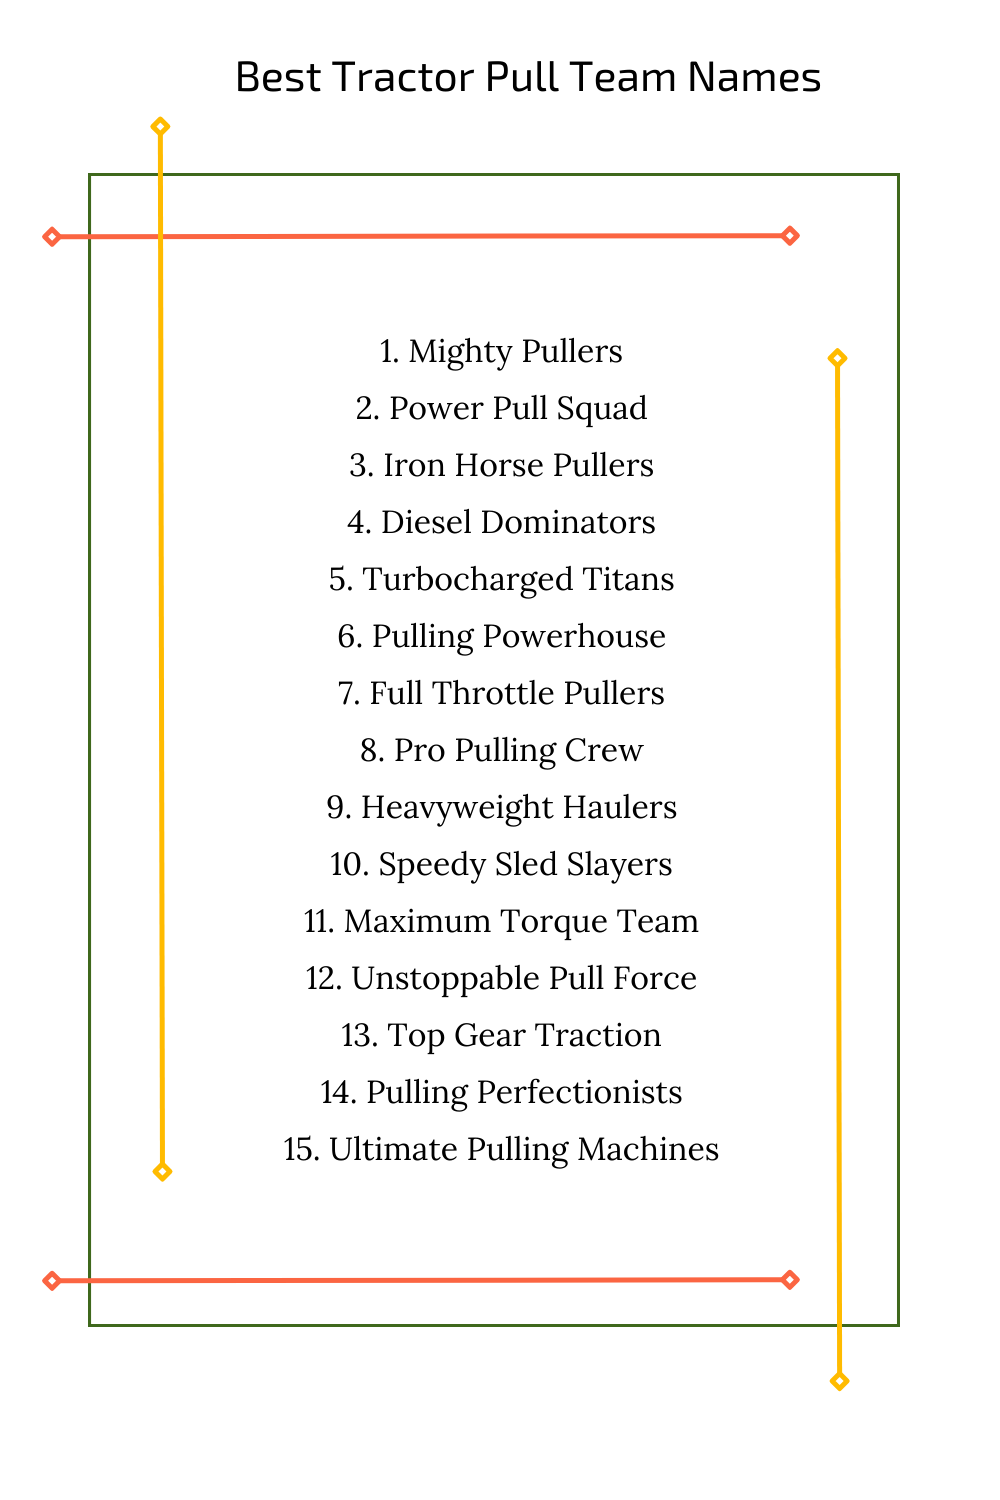 Best Tractor Pull Team Names